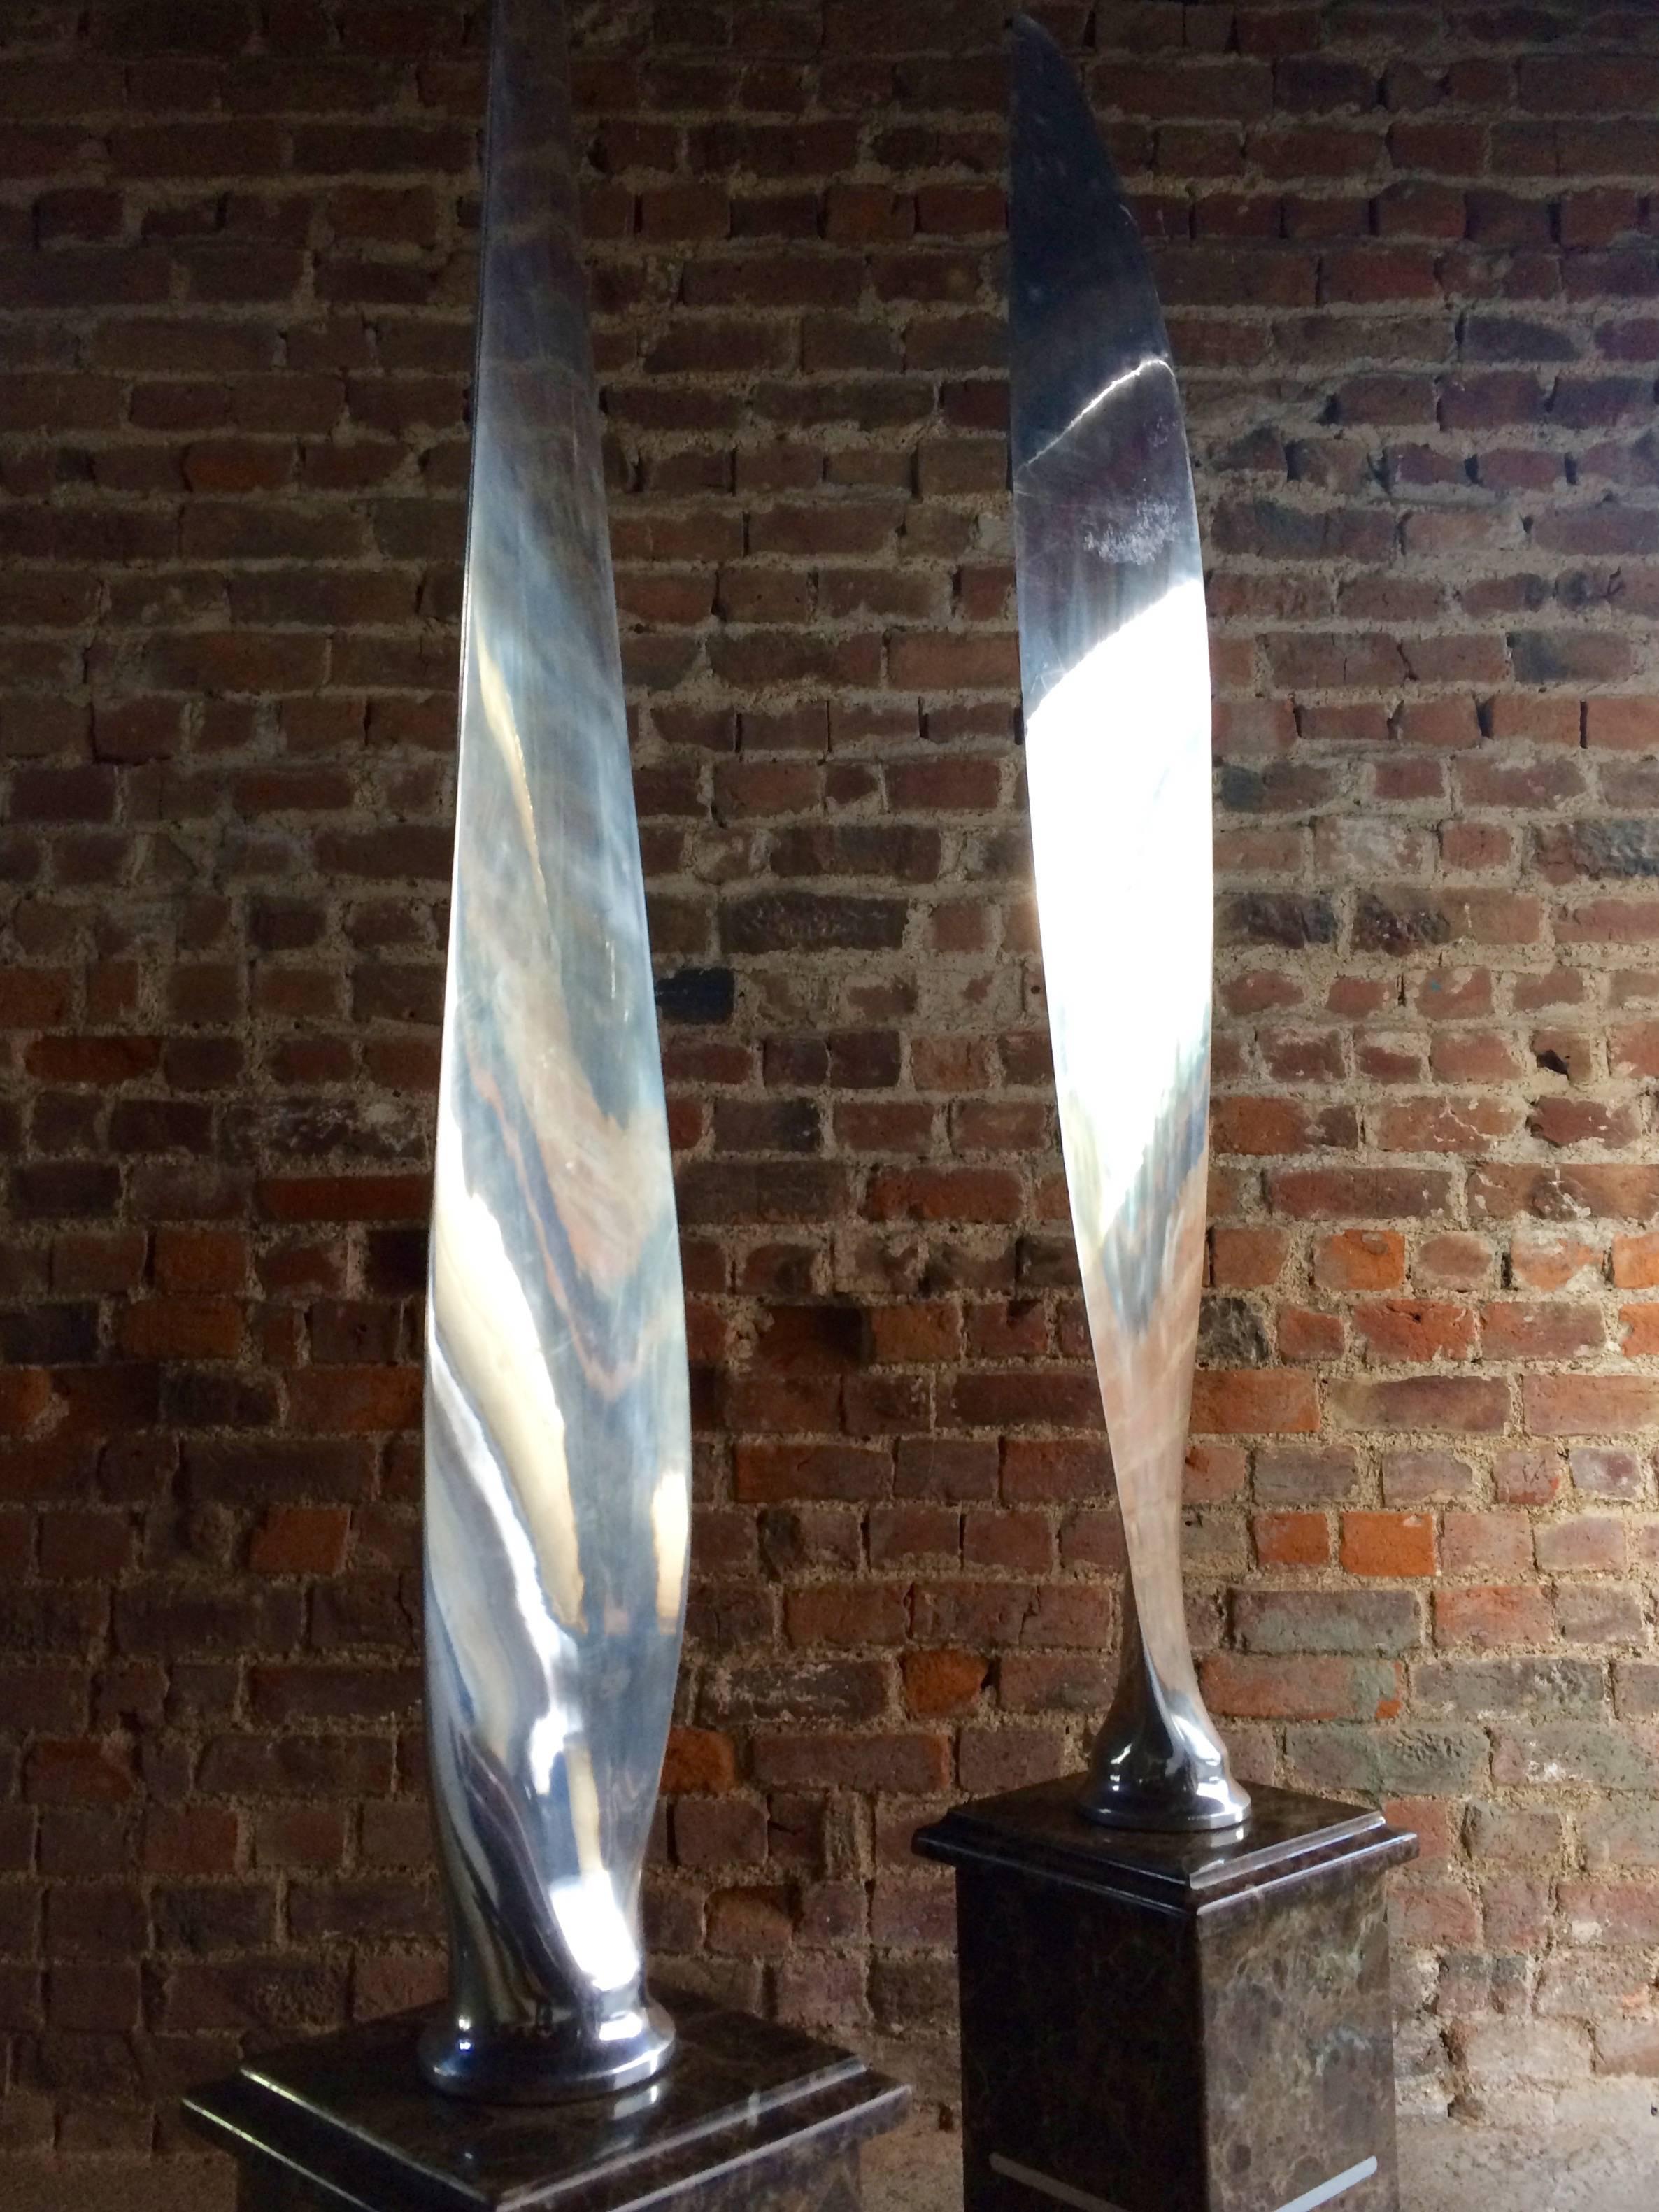 Pair of Tall Polished Chrome Airplane Propeller Blades Sculptures 1